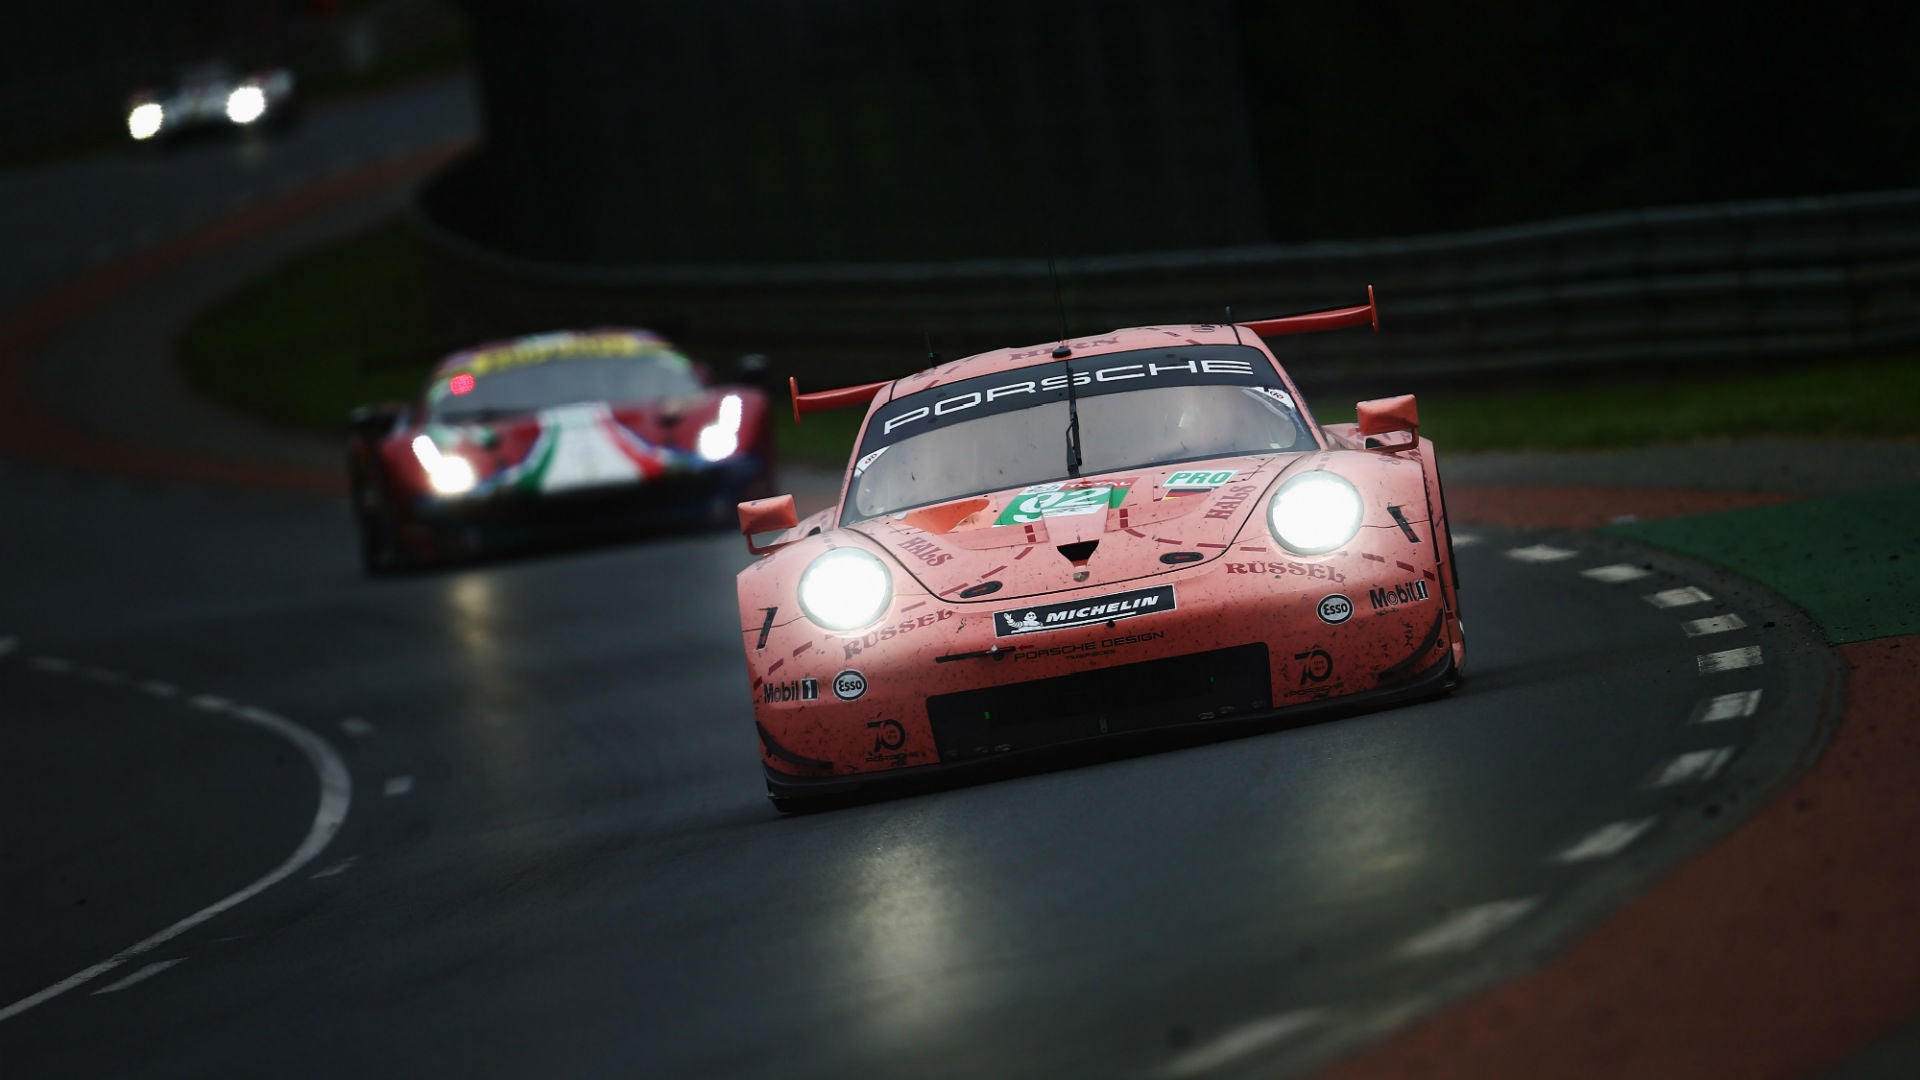 Manthey Porsche Nabs GTE-Pro 1-2 Finish at Le Mans | The Drive